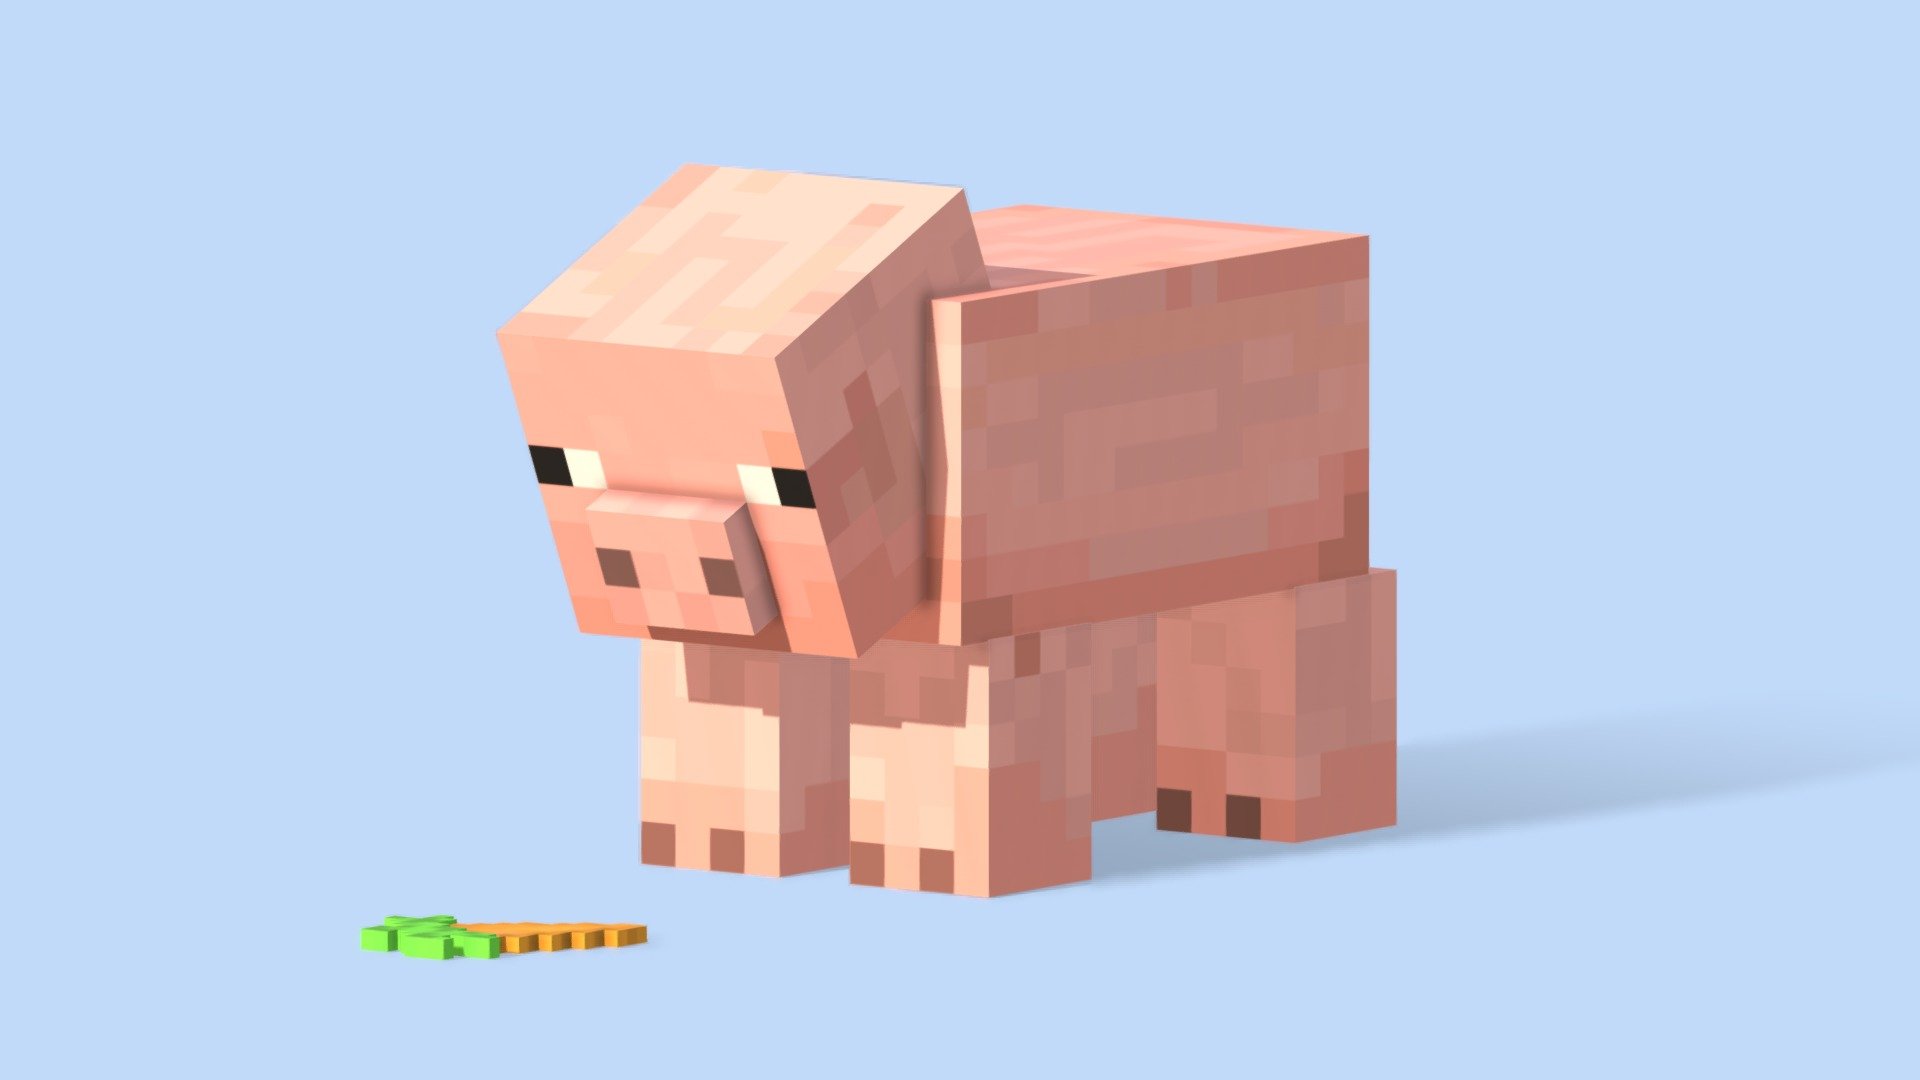 MINECRAFT PIG WITH CARROT